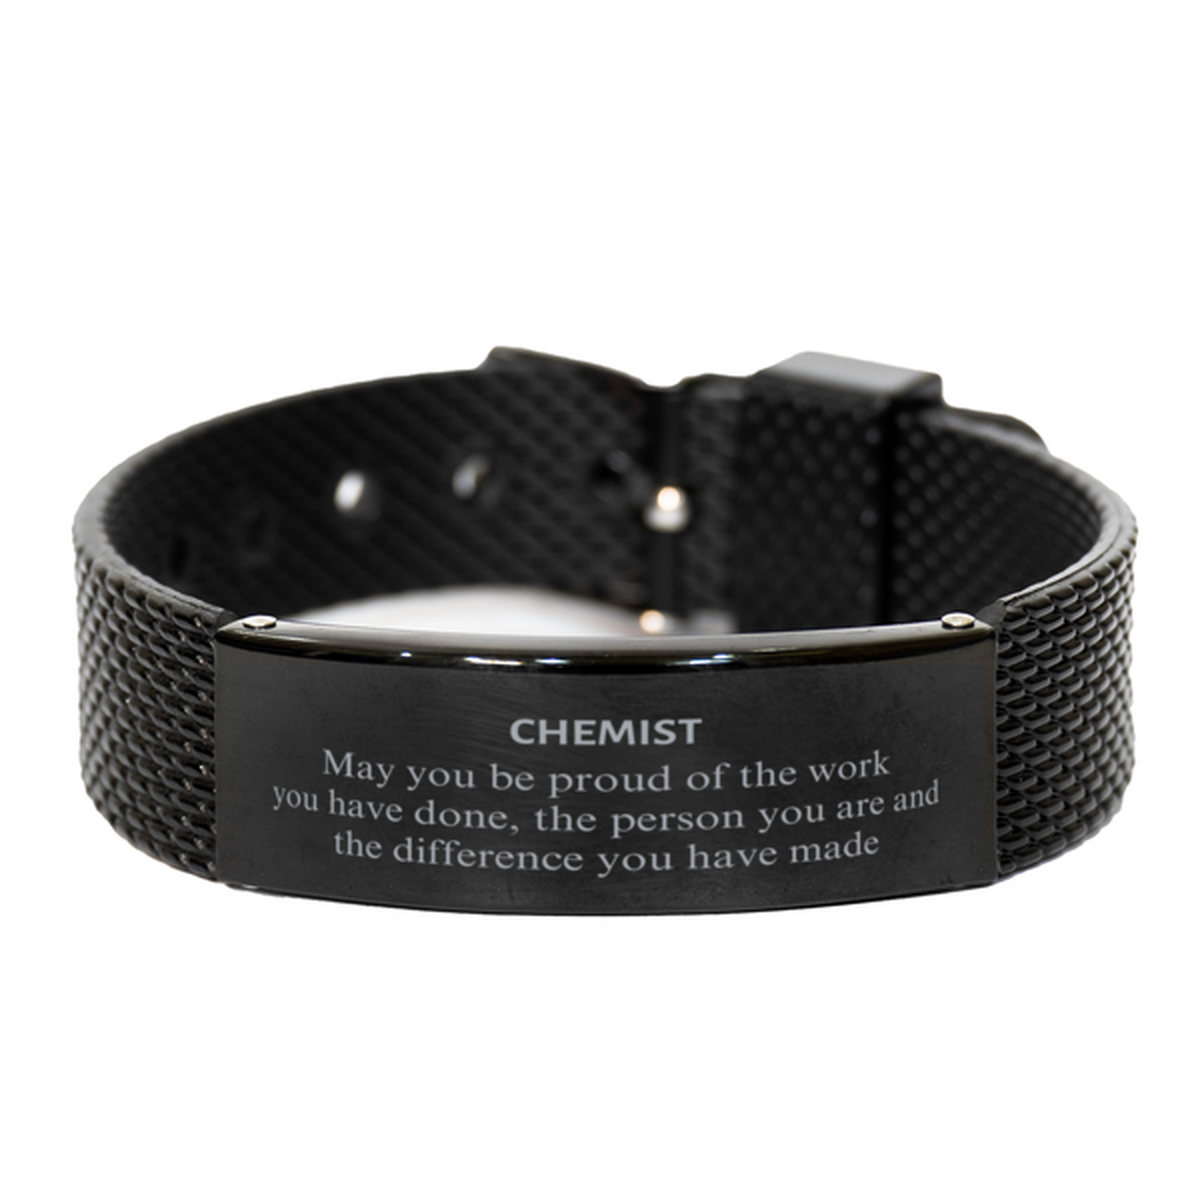 Chemist May you be proud of the work you have done, Retirement Chemist Black Shark Mesh Bracelet for Colleague Appreciation Gifts Amazing for Chemist